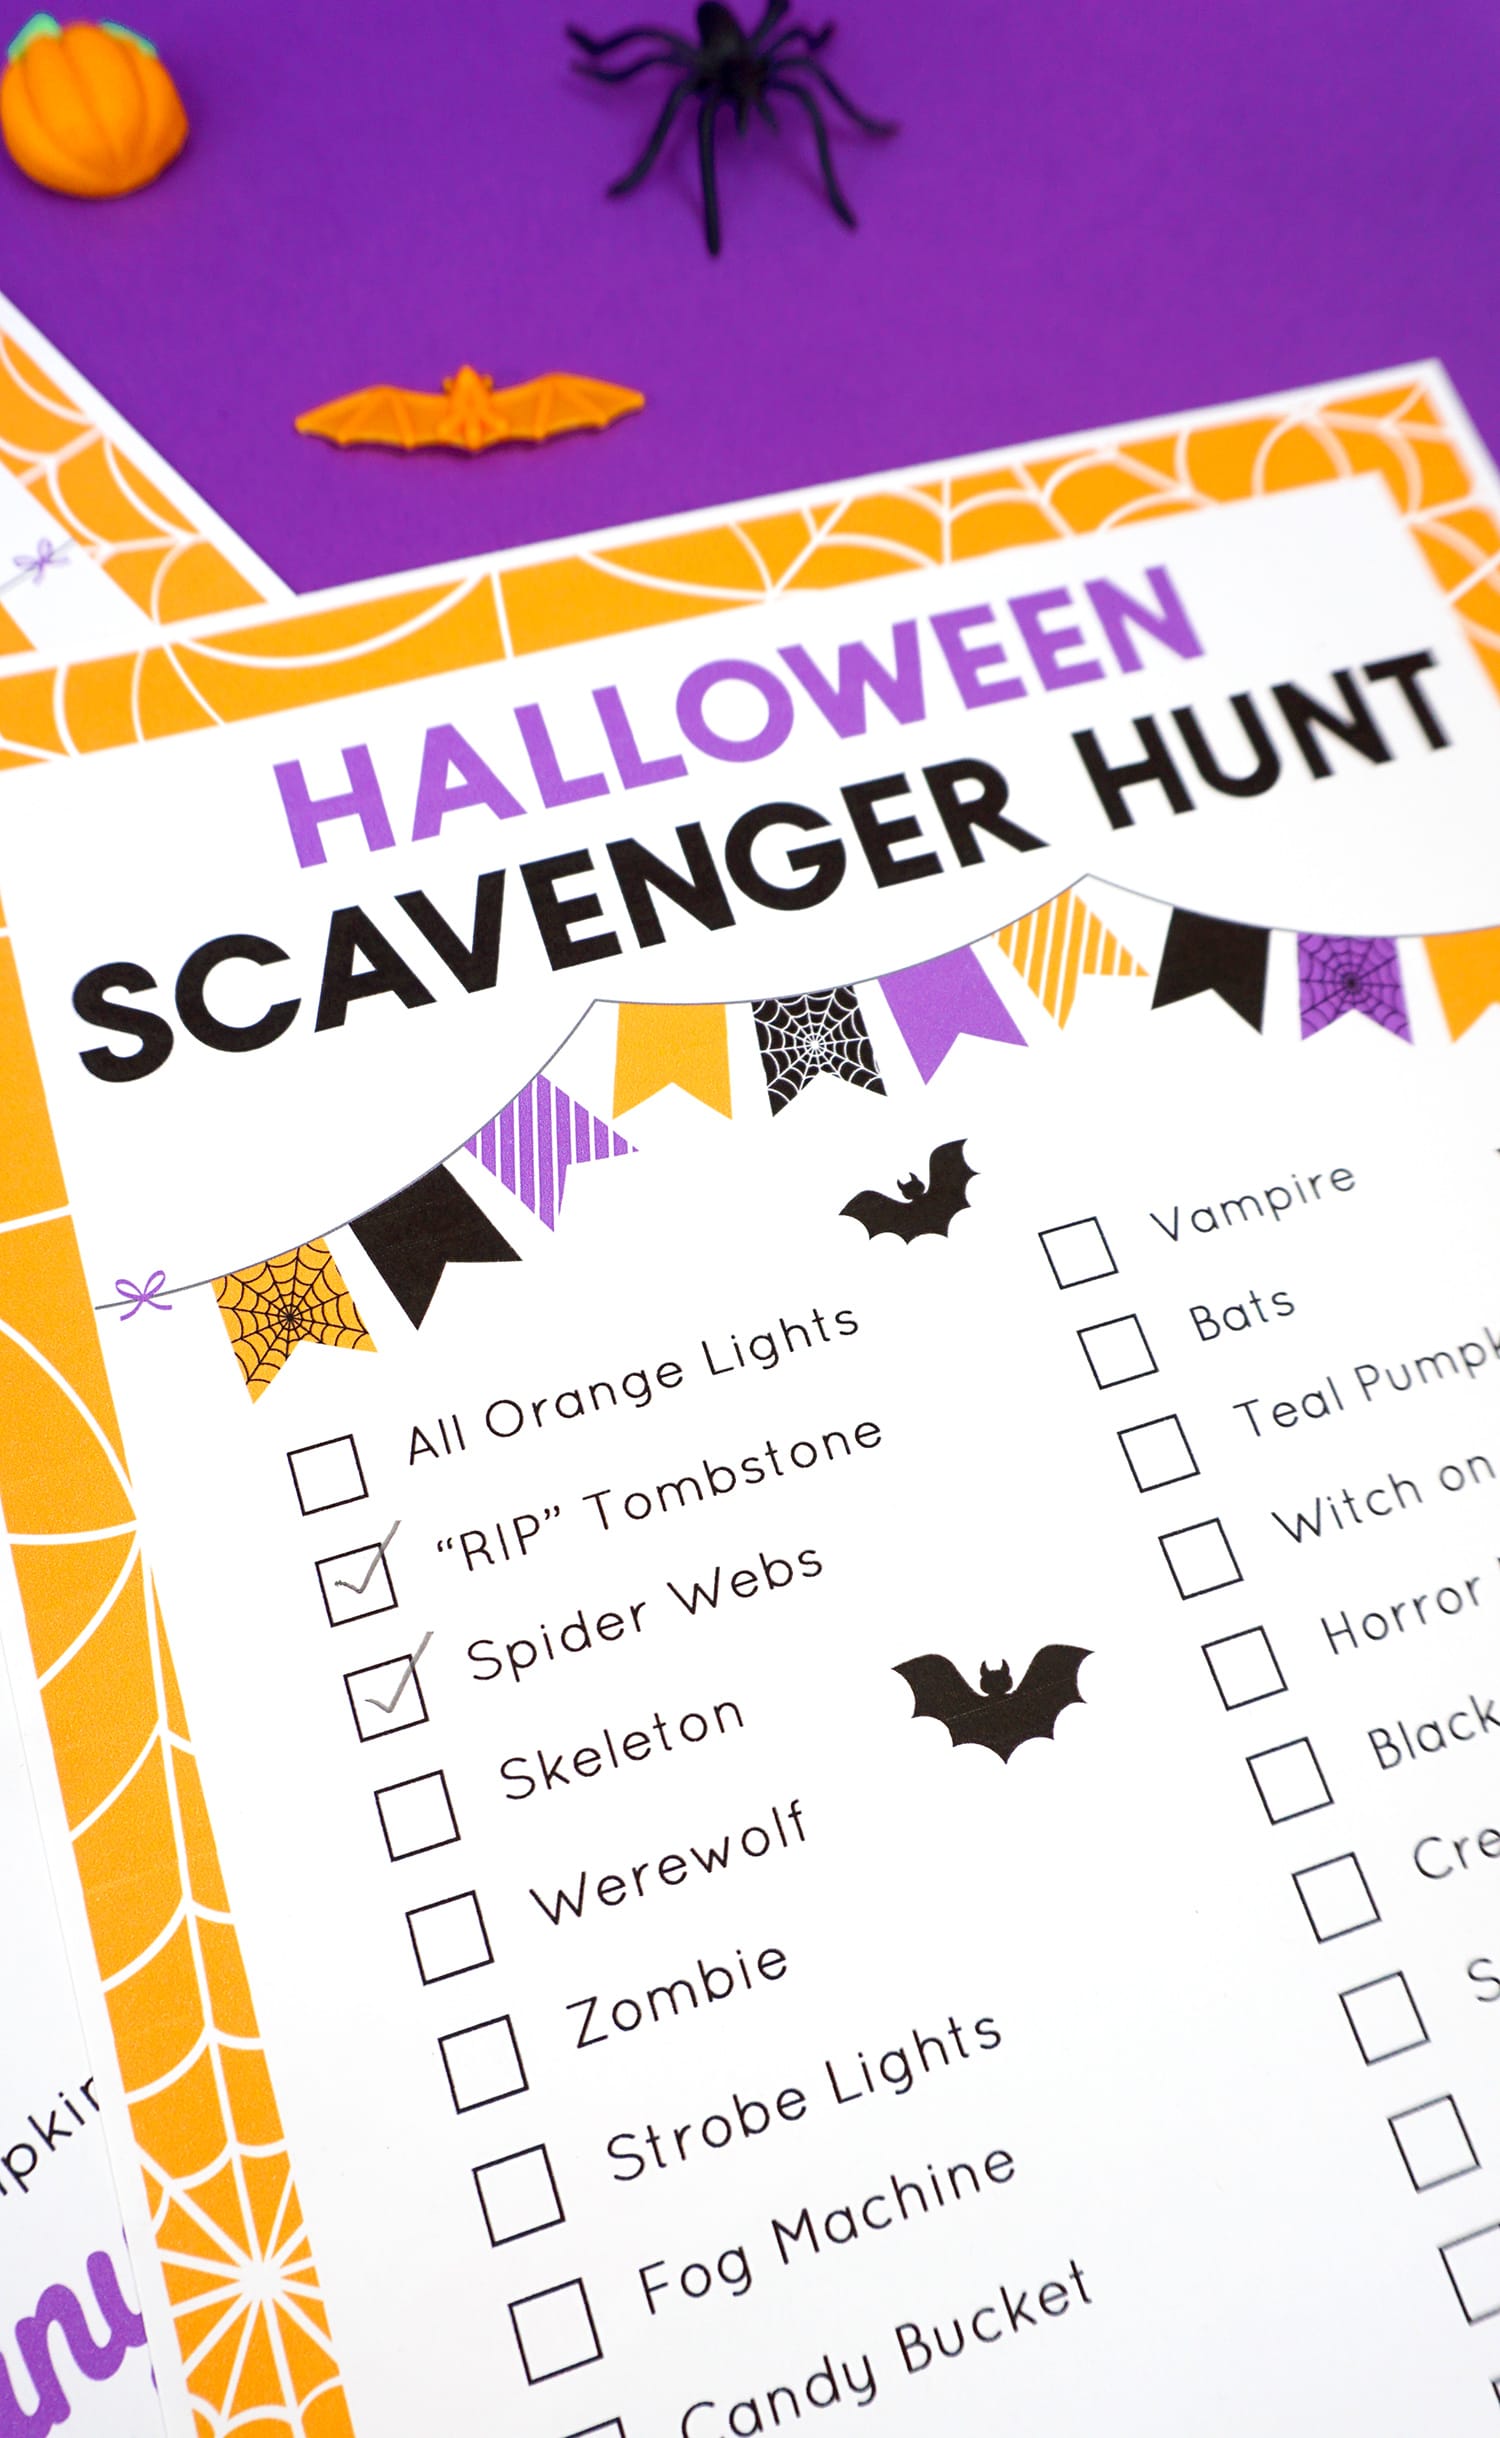 Close up of Halloween Scavenger Hunt checklist on a purple background
